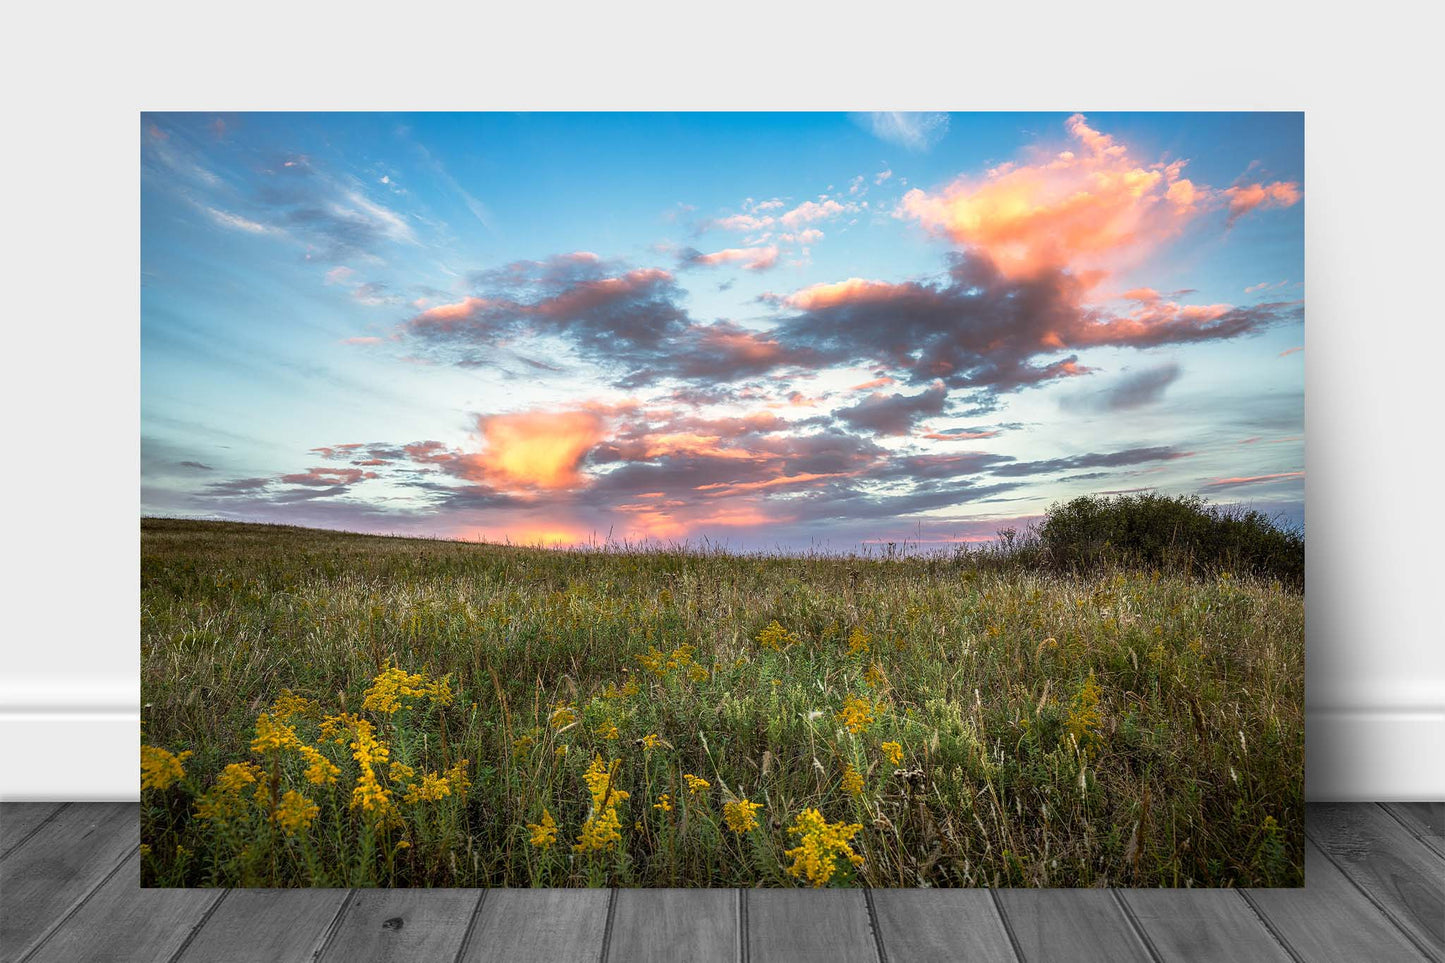 Great Plains metal print on aluminum of clouds illuminated by evening sunlight over the Tallgrass Prairie at sunset in Osage County, Oklahoma by Sean Ramsey of Southern Plains Photography.